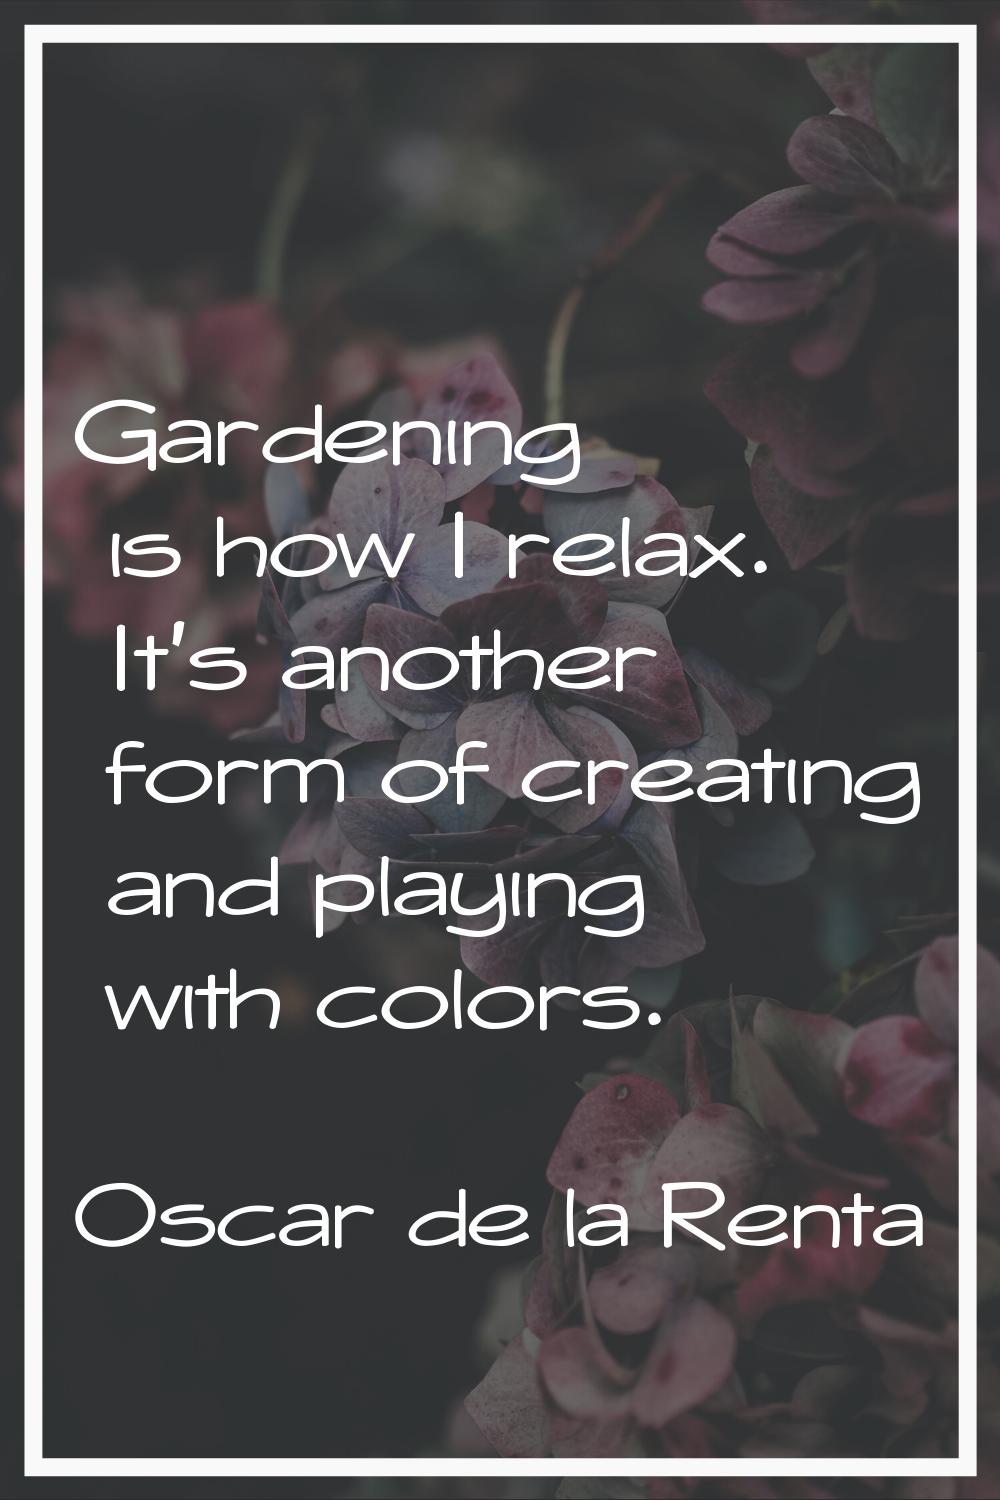 Gardening is how I relax. It's another form of creating and playing with colors.